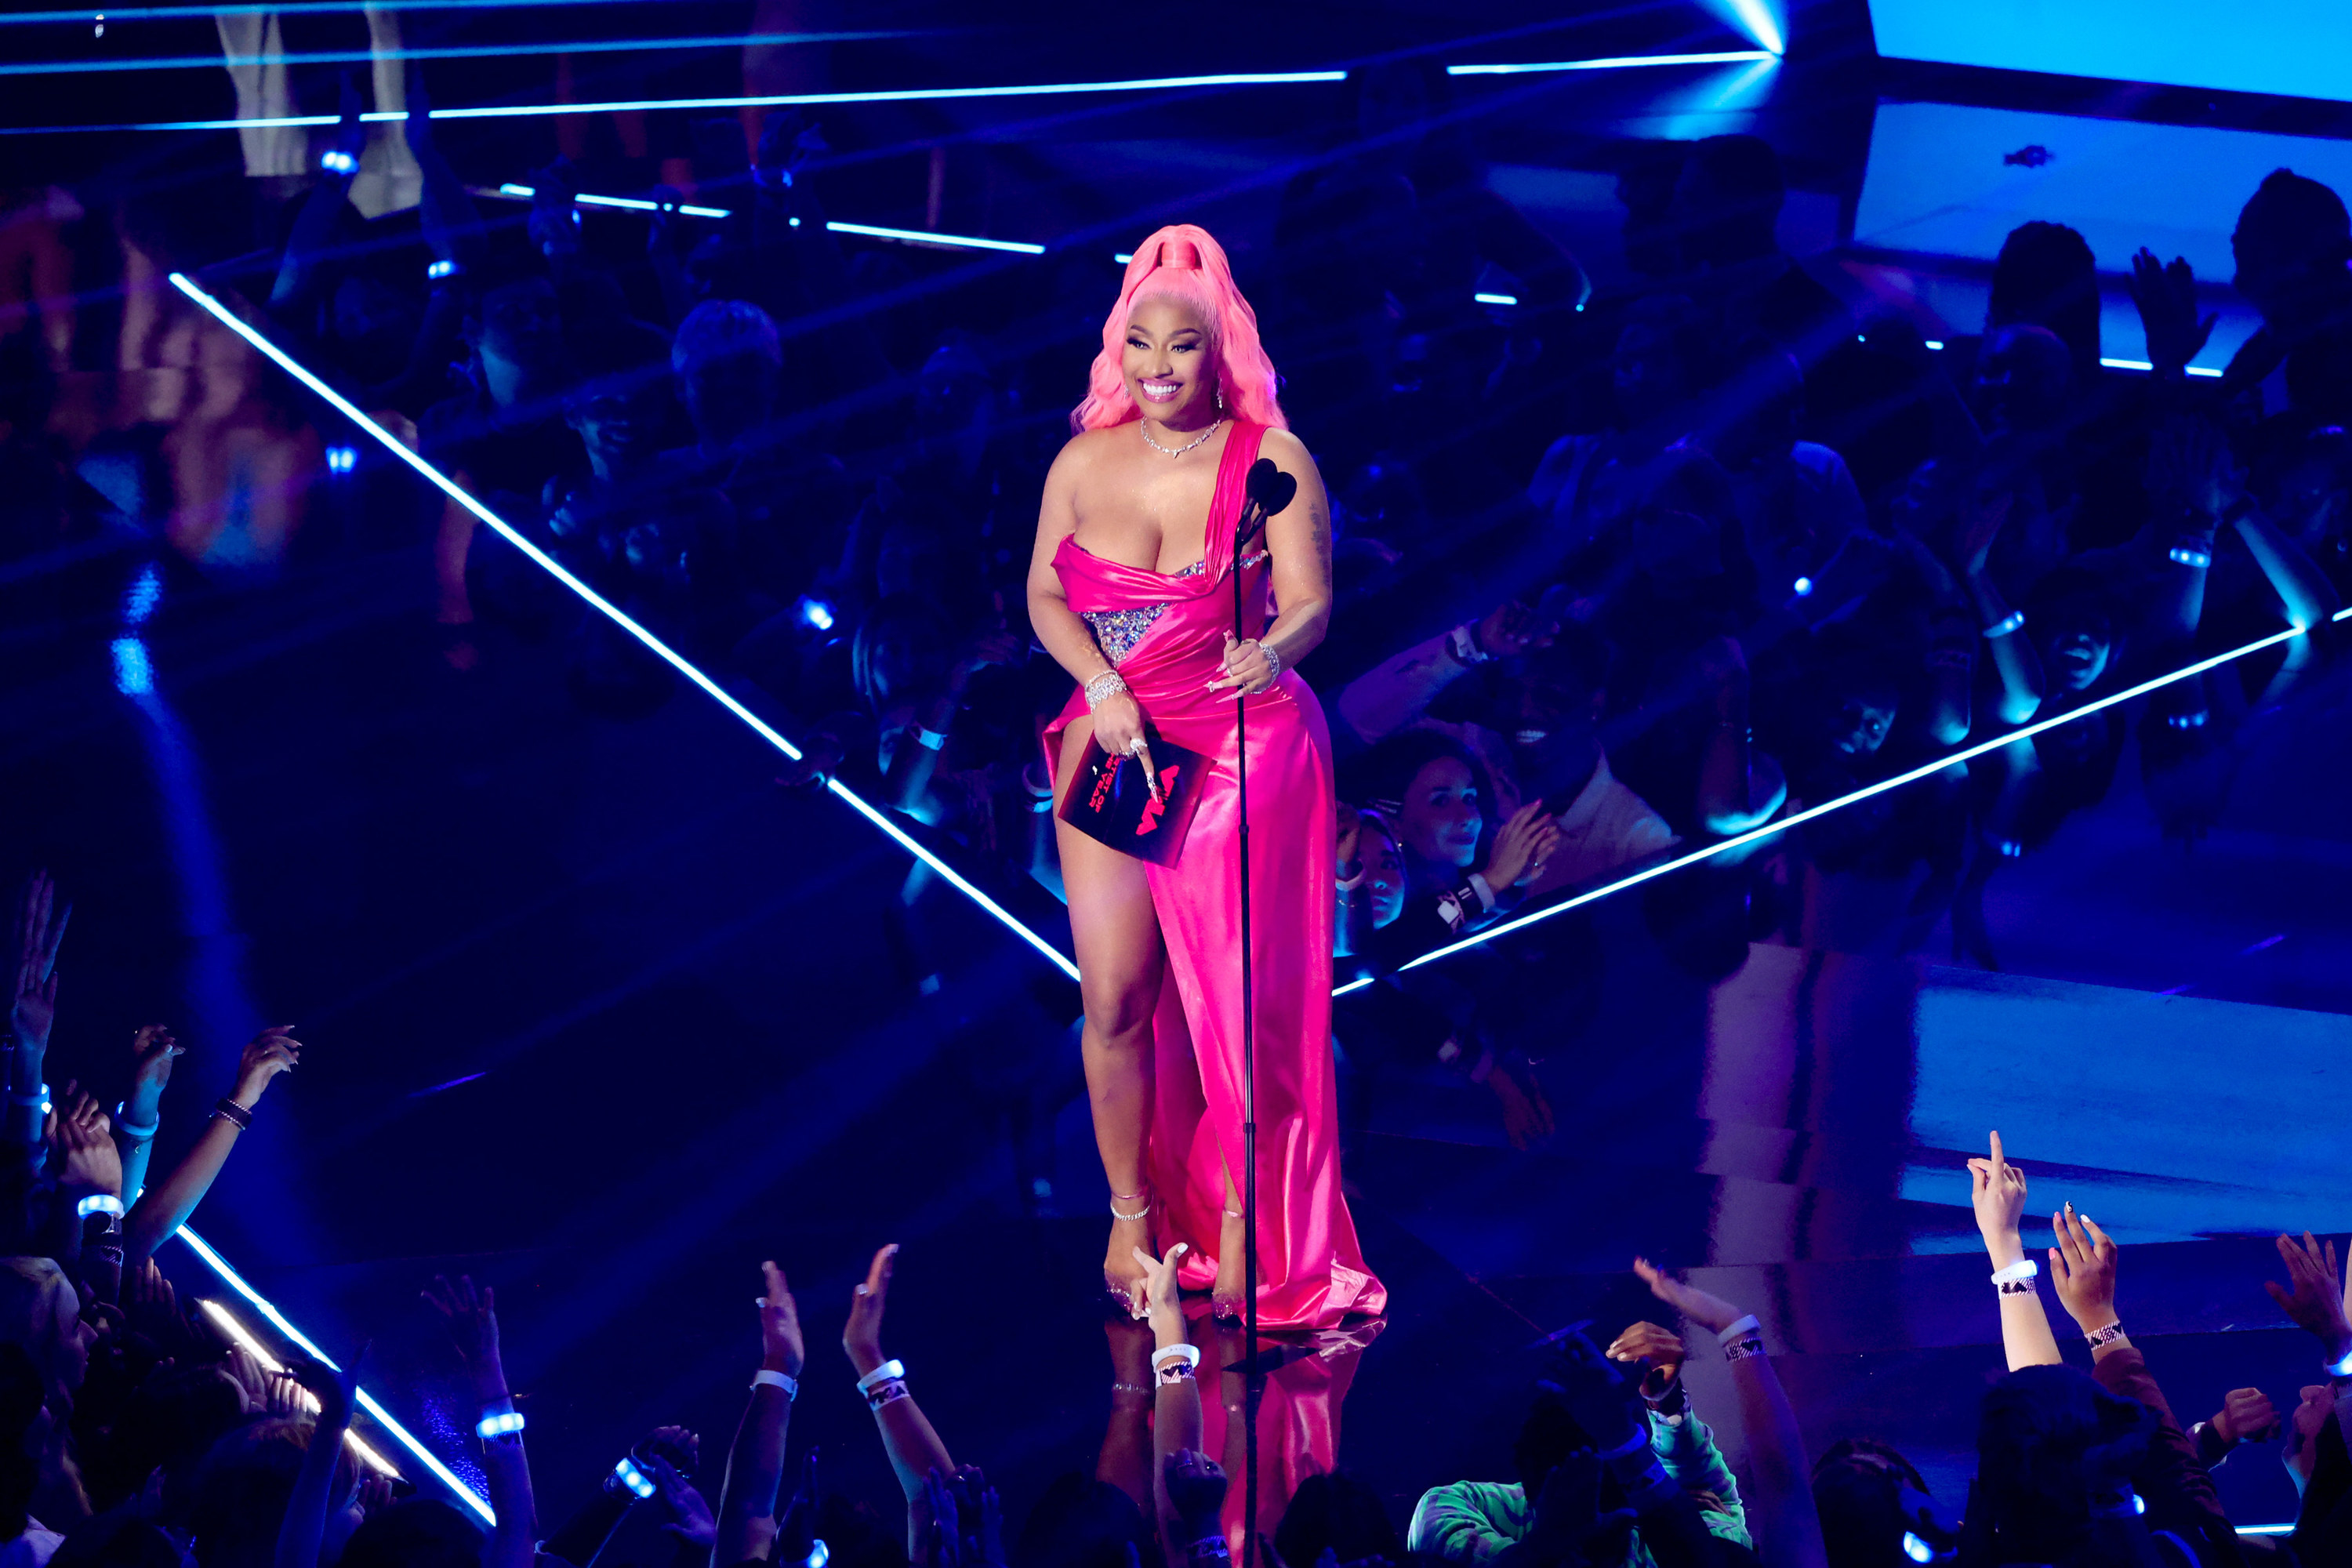 Nicki stands in the middle of a darkened stage with the spotlight illuminating her. She wears a bright pink cocktail dress with one leg showing, and her hair is candy pink and flows down her back from a tall ponytail atop her head. She is smiling widely.